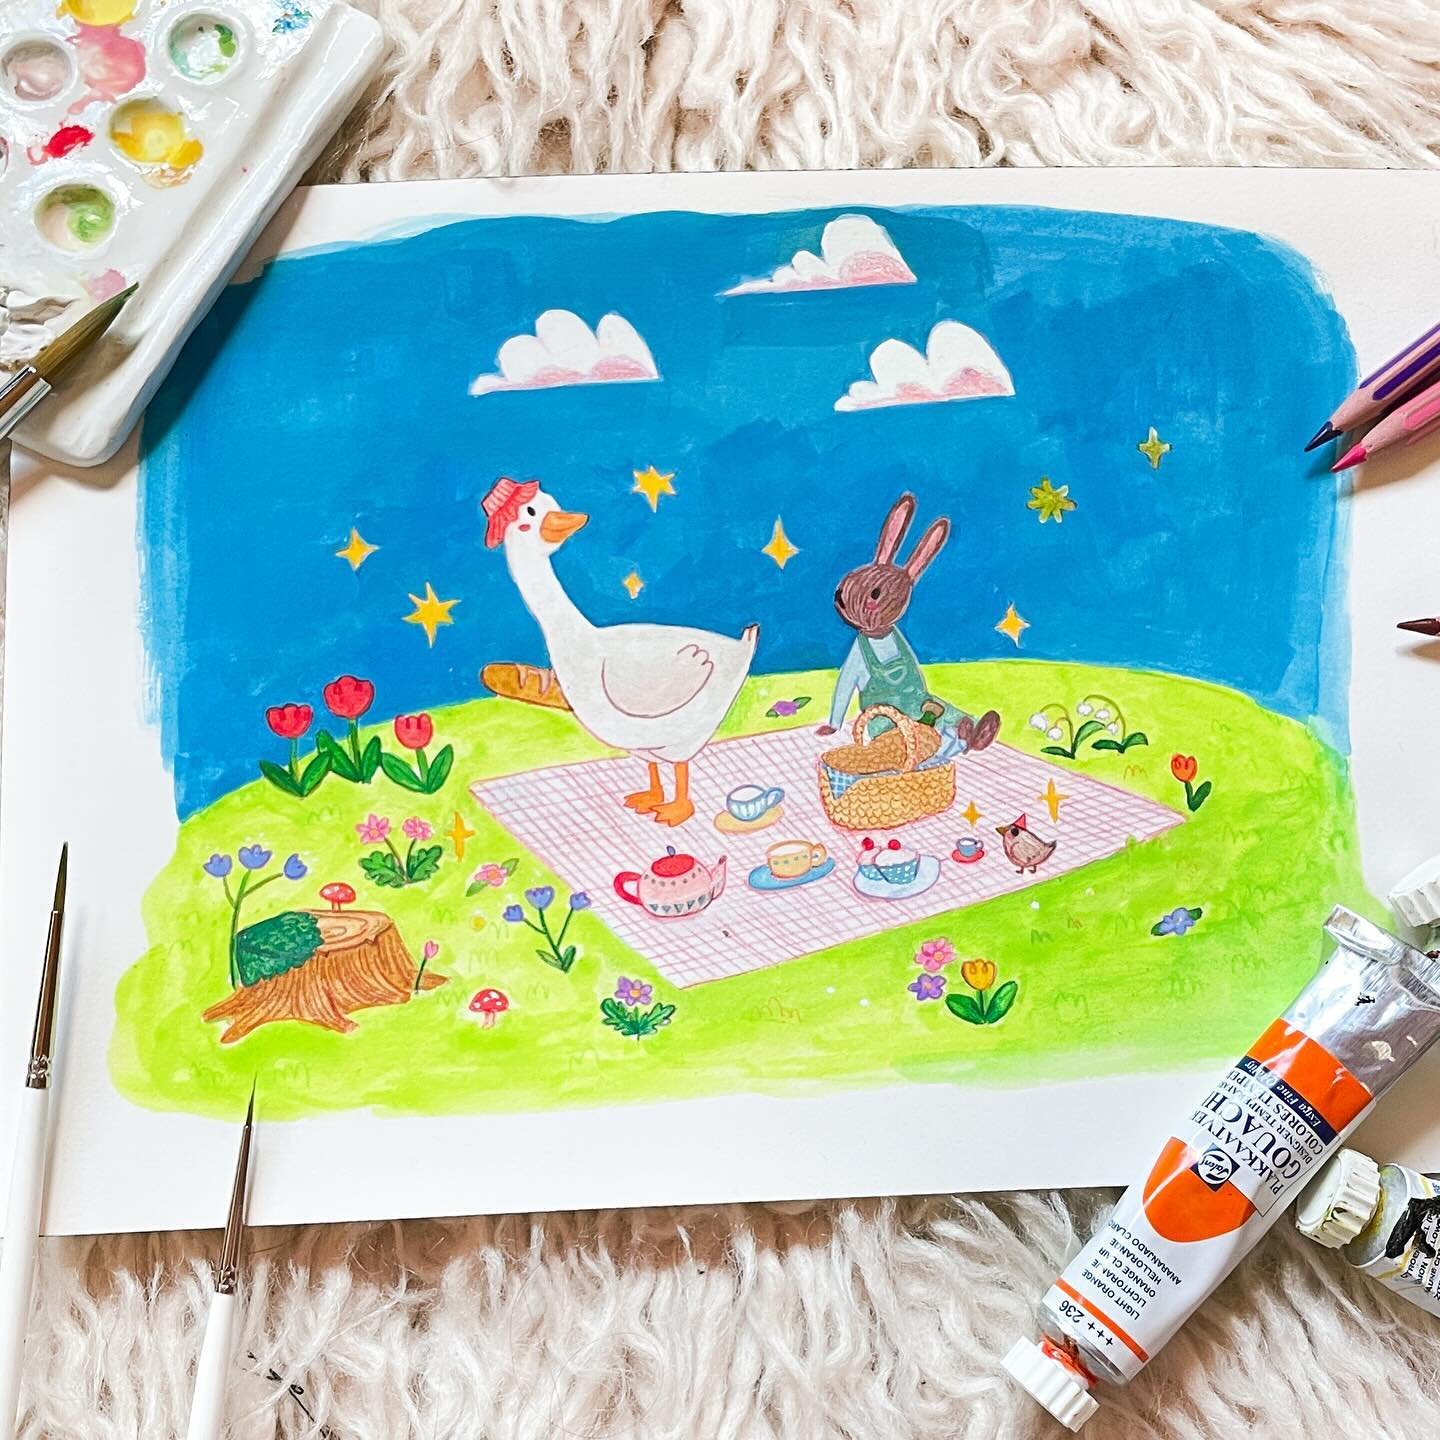 Spring is here and picnic season officially starts 🤩 🧺 🌷 

I am not posting a lot but it just means that I am creating a lot! :3

I am feeling really inspired after of few years feeling stuck, and that shows, at least to me&hellip; I am also being